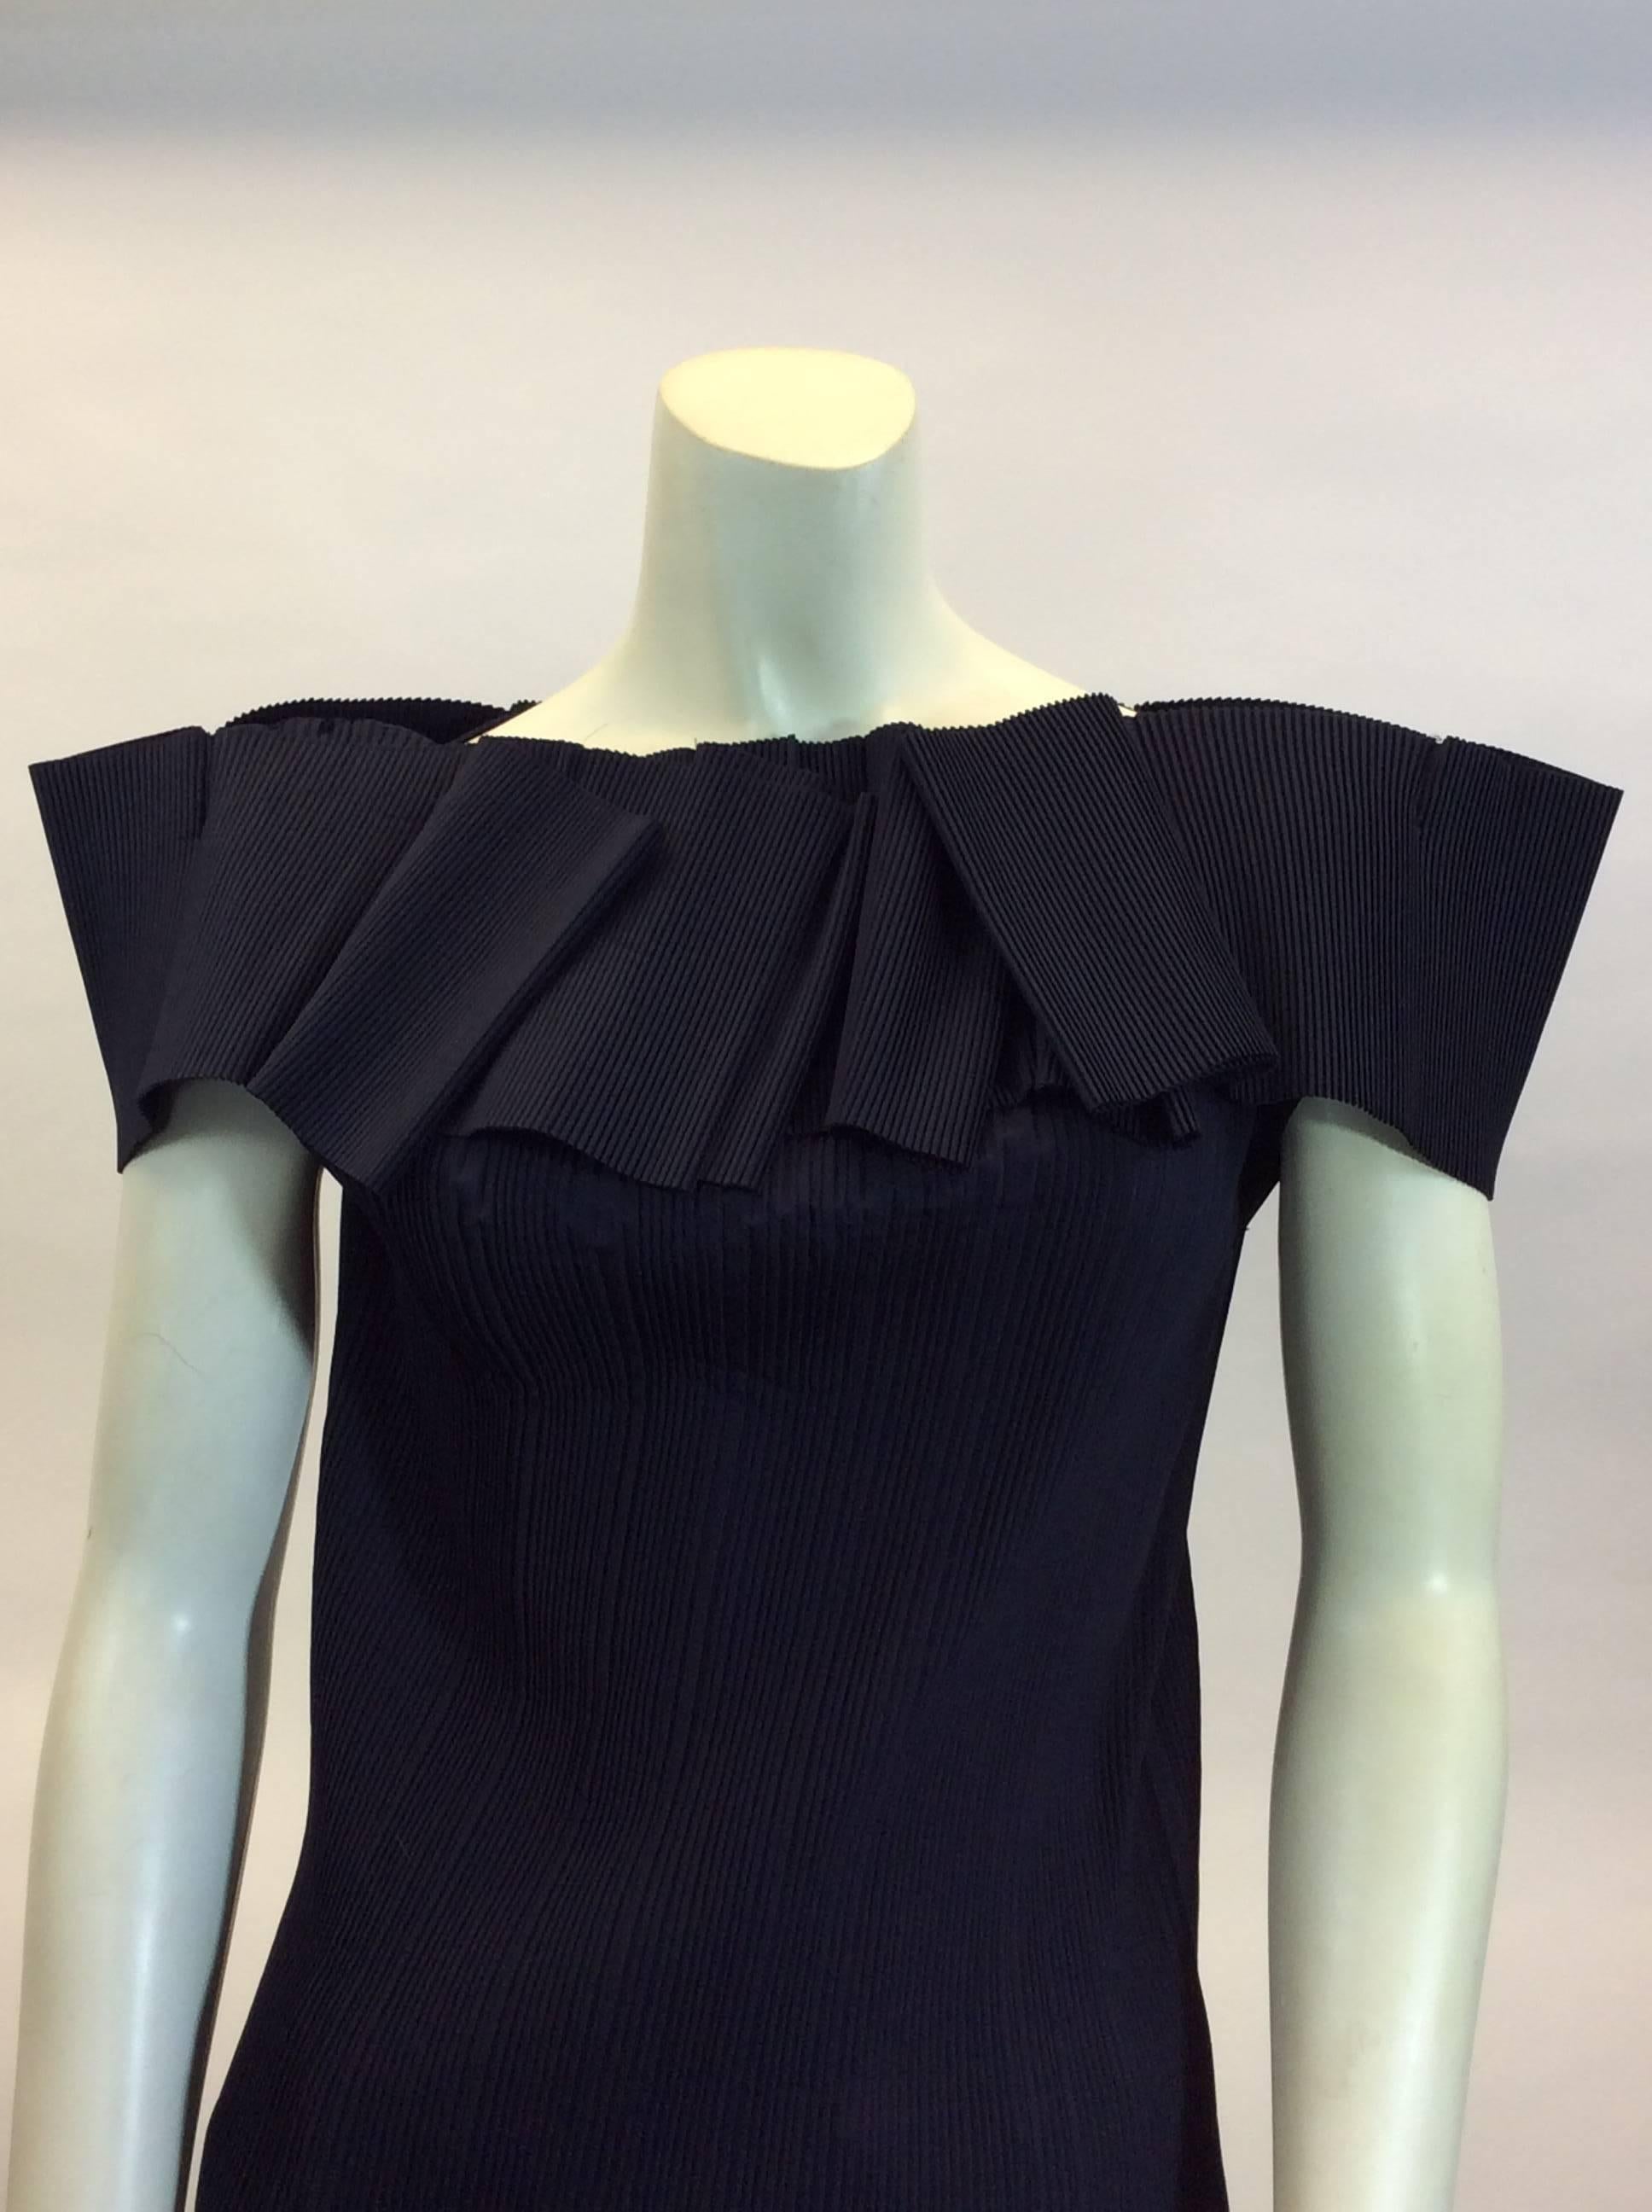 Issey Miyake off the shoulder top
Navy & pleated 
Made in Japan
Size Medium
100% Polyester
